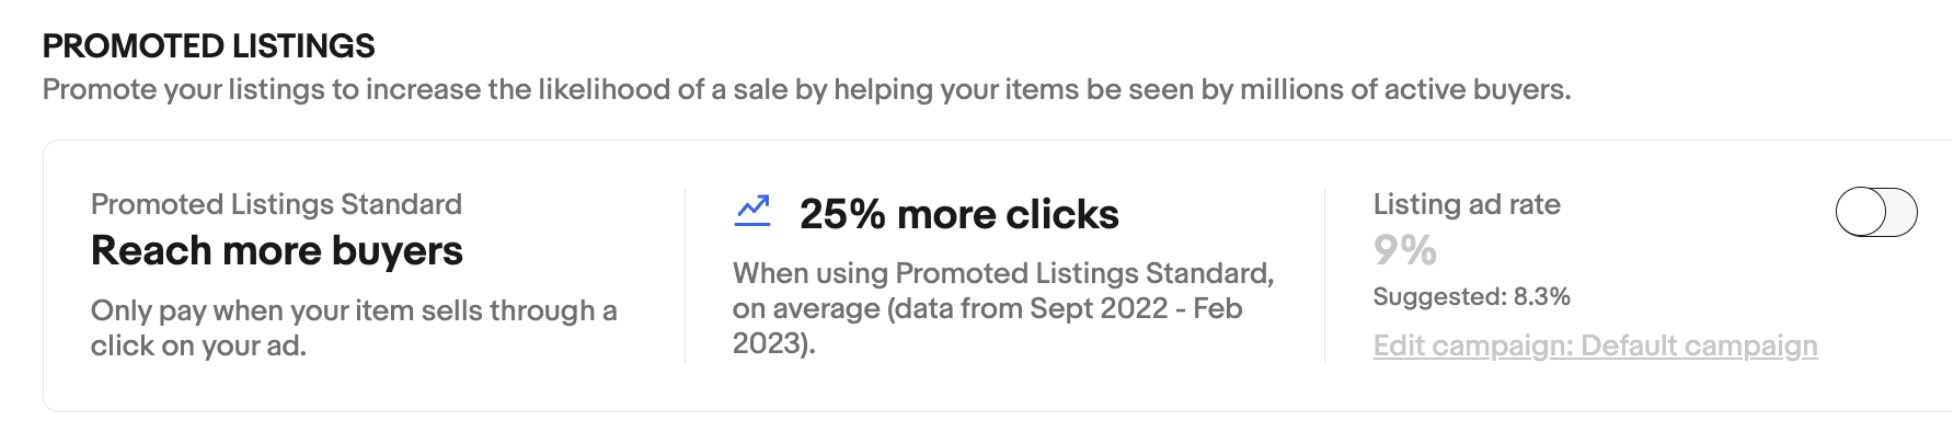 PROMOTED LISTINGS